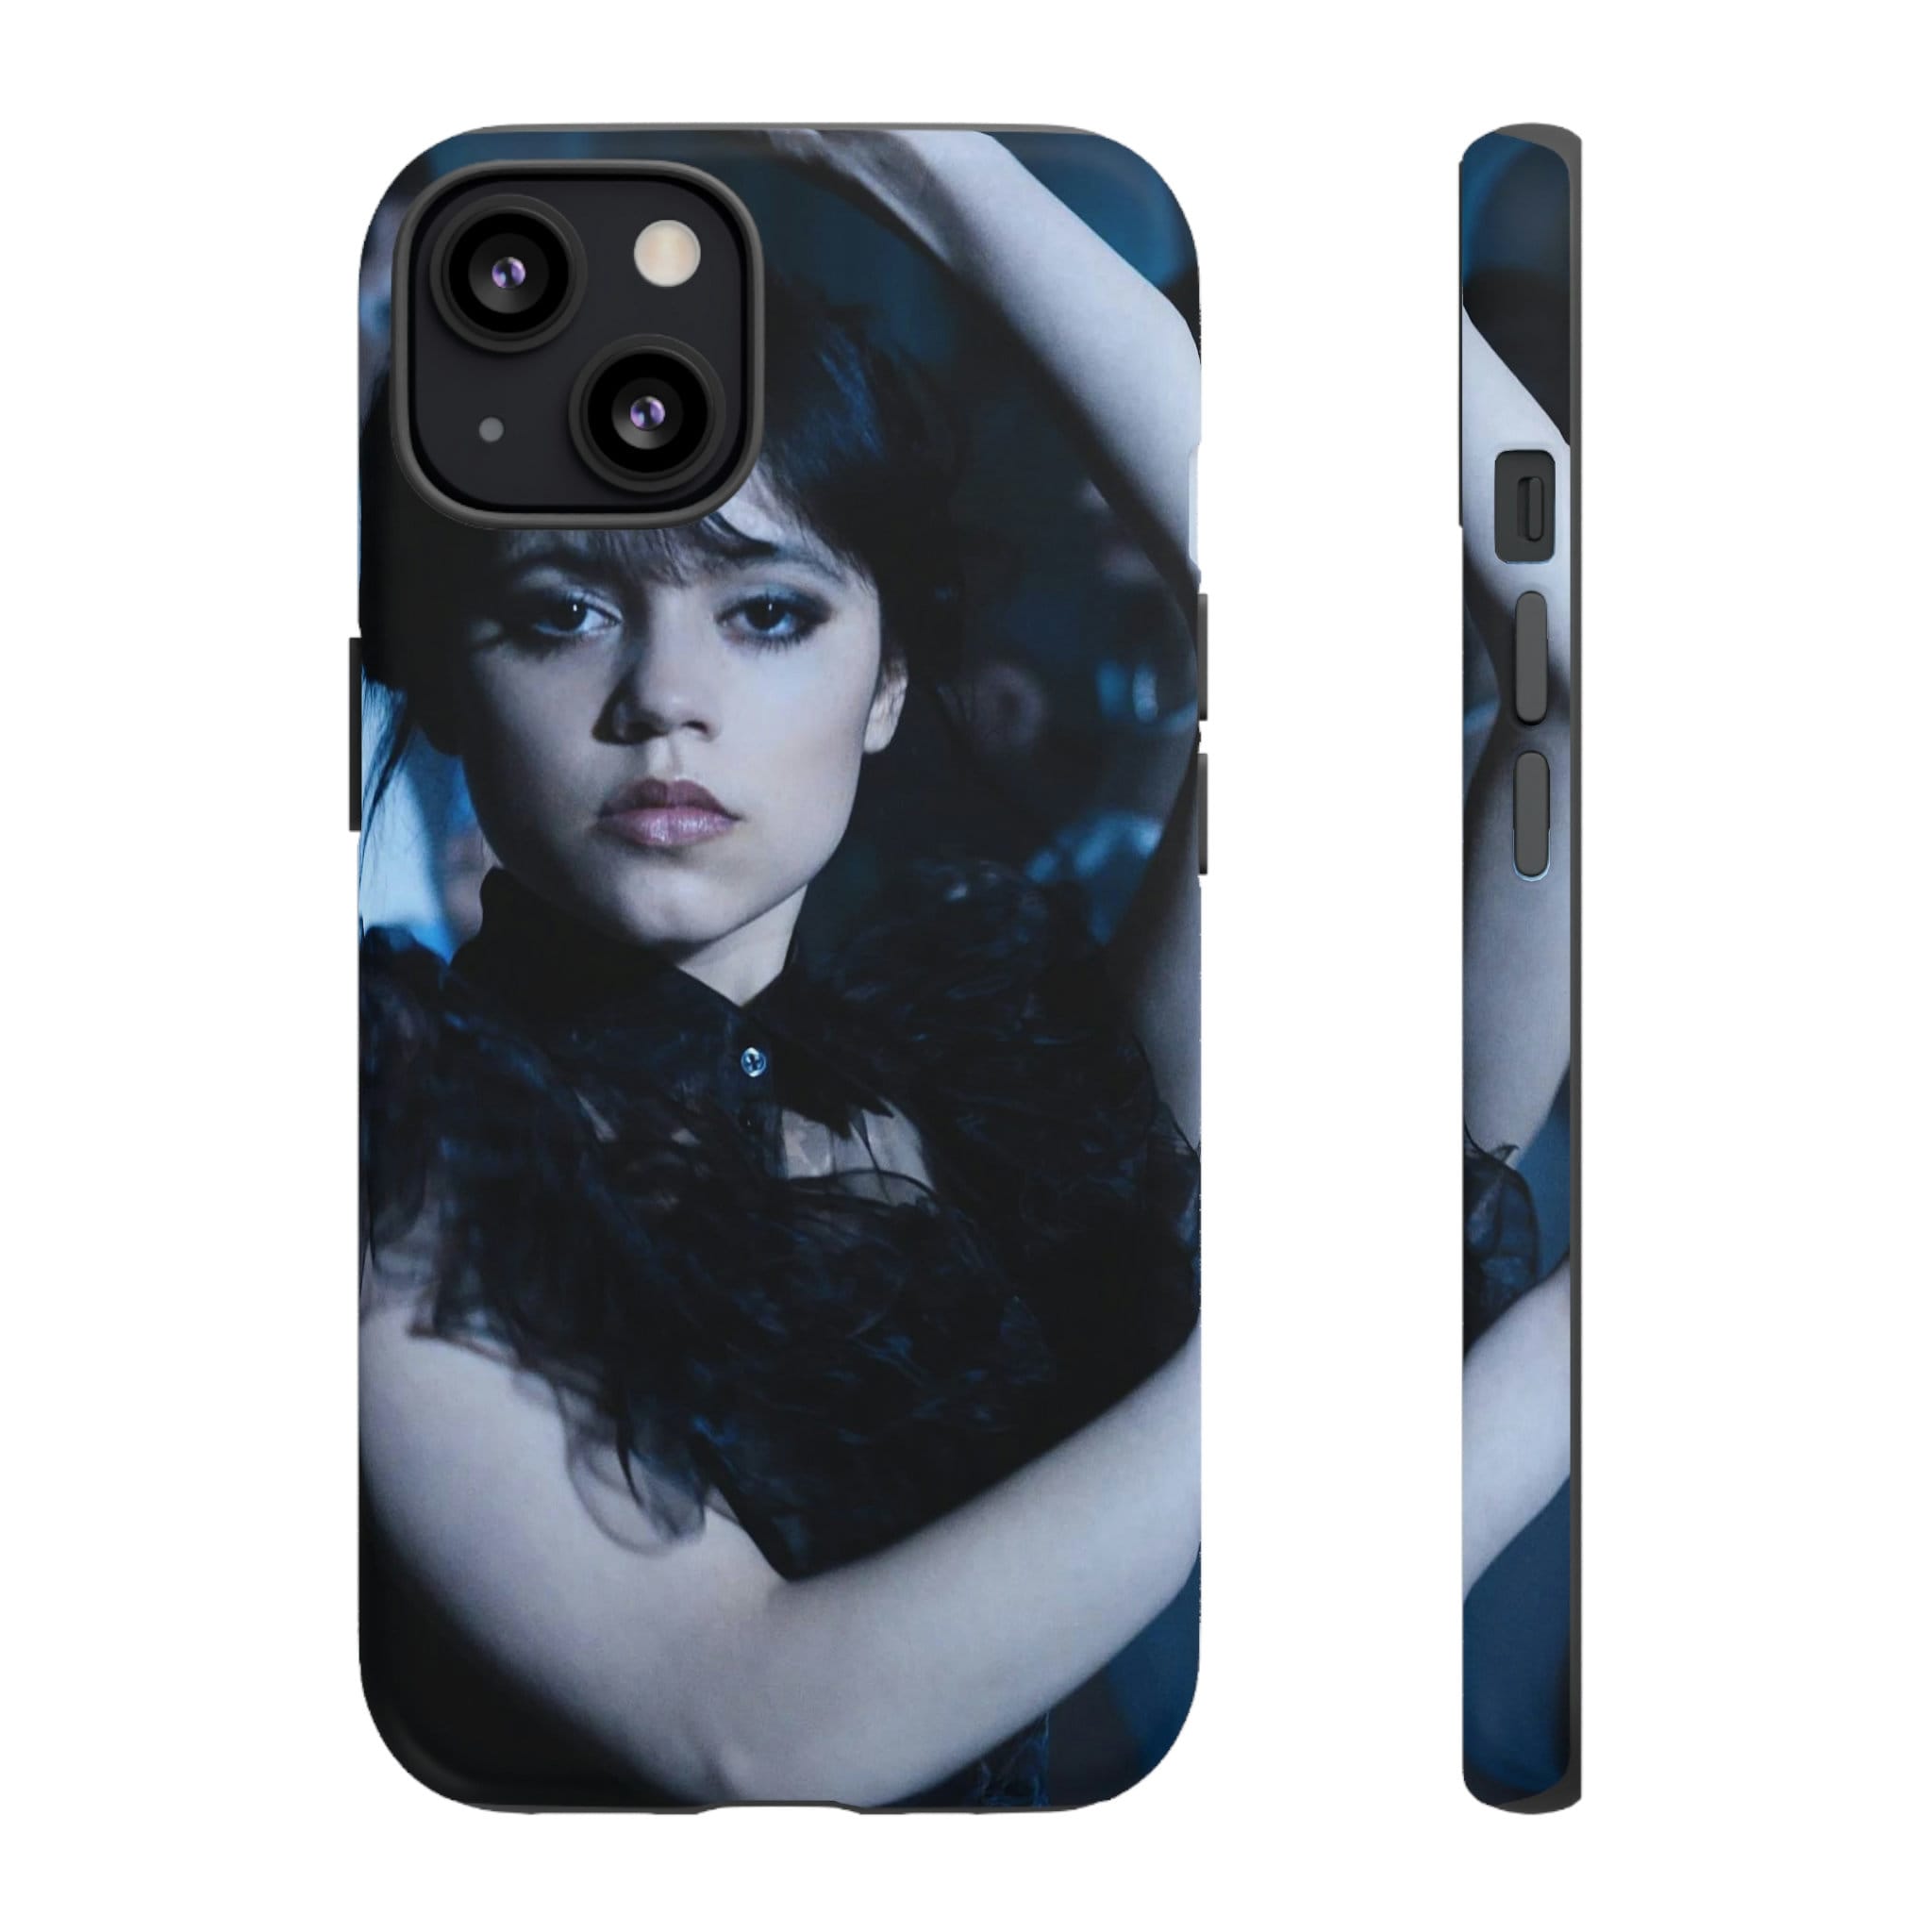 Wednesday Dance phone case from Tough Cases